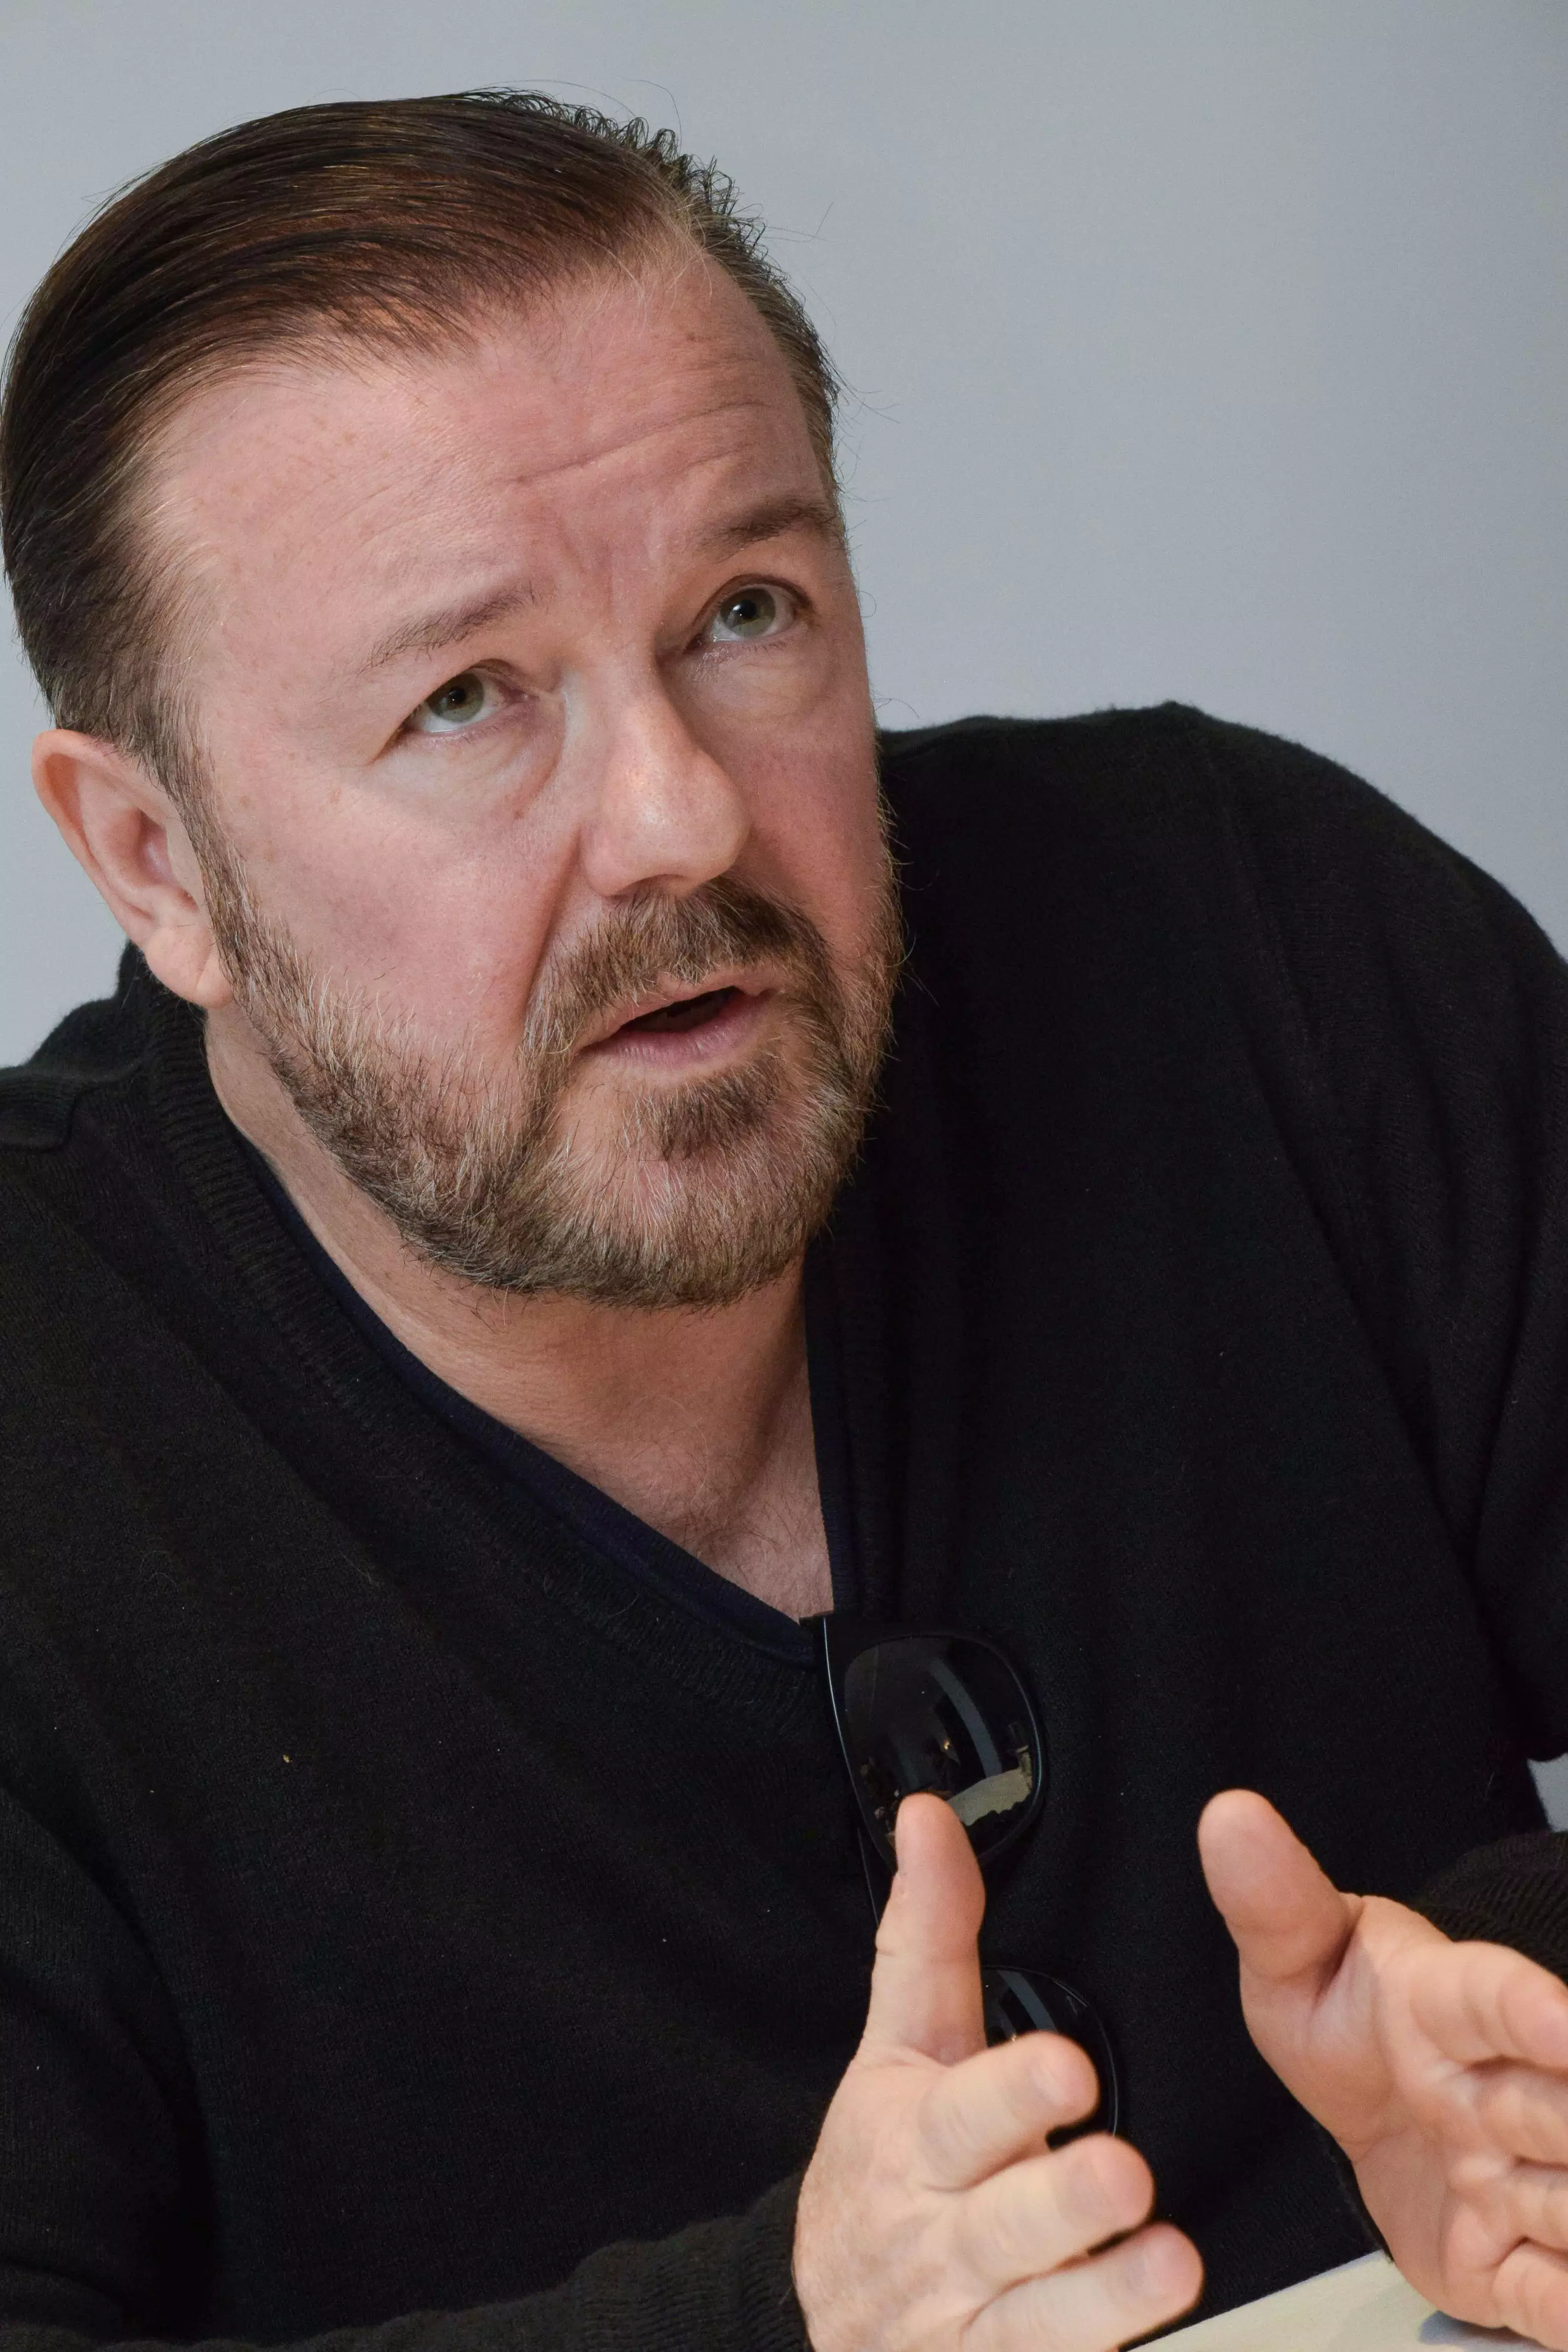 Ricky Gervais believes cancel culture is having a 'negative impact' on comedy.